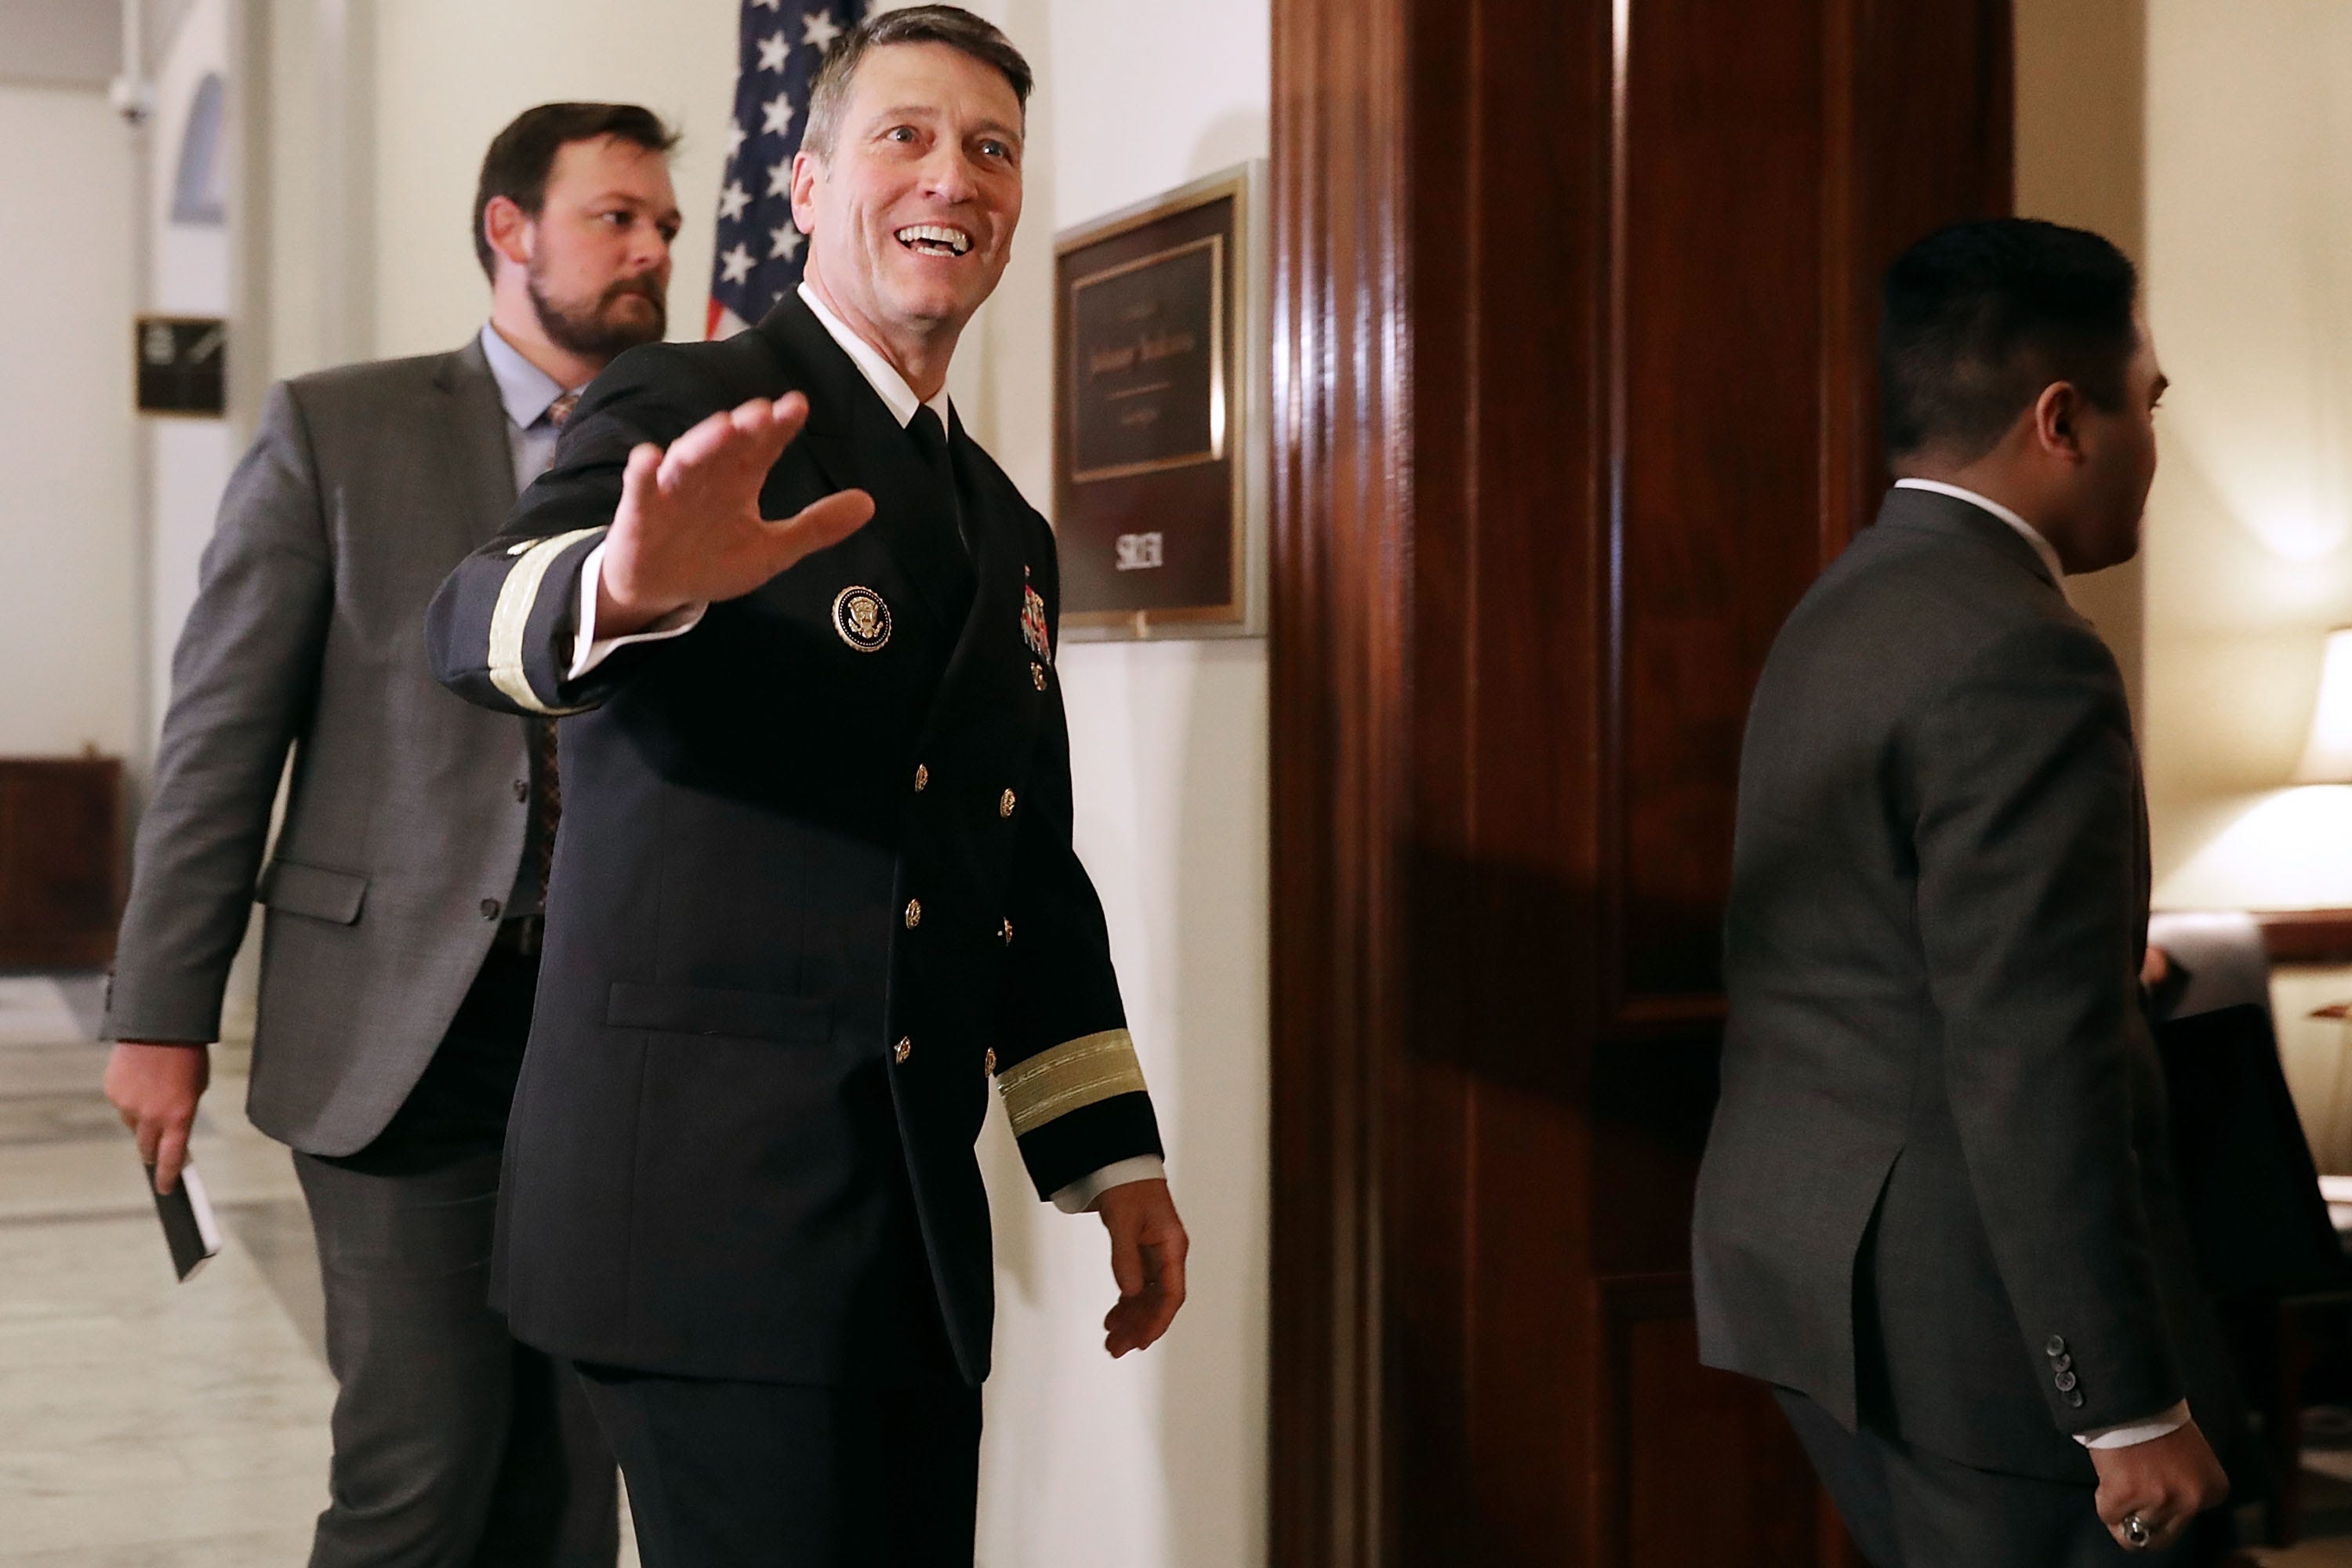 VA nominee Ronny Jackson dished out opioids, wrecked vehicle while drunk, colleagues say